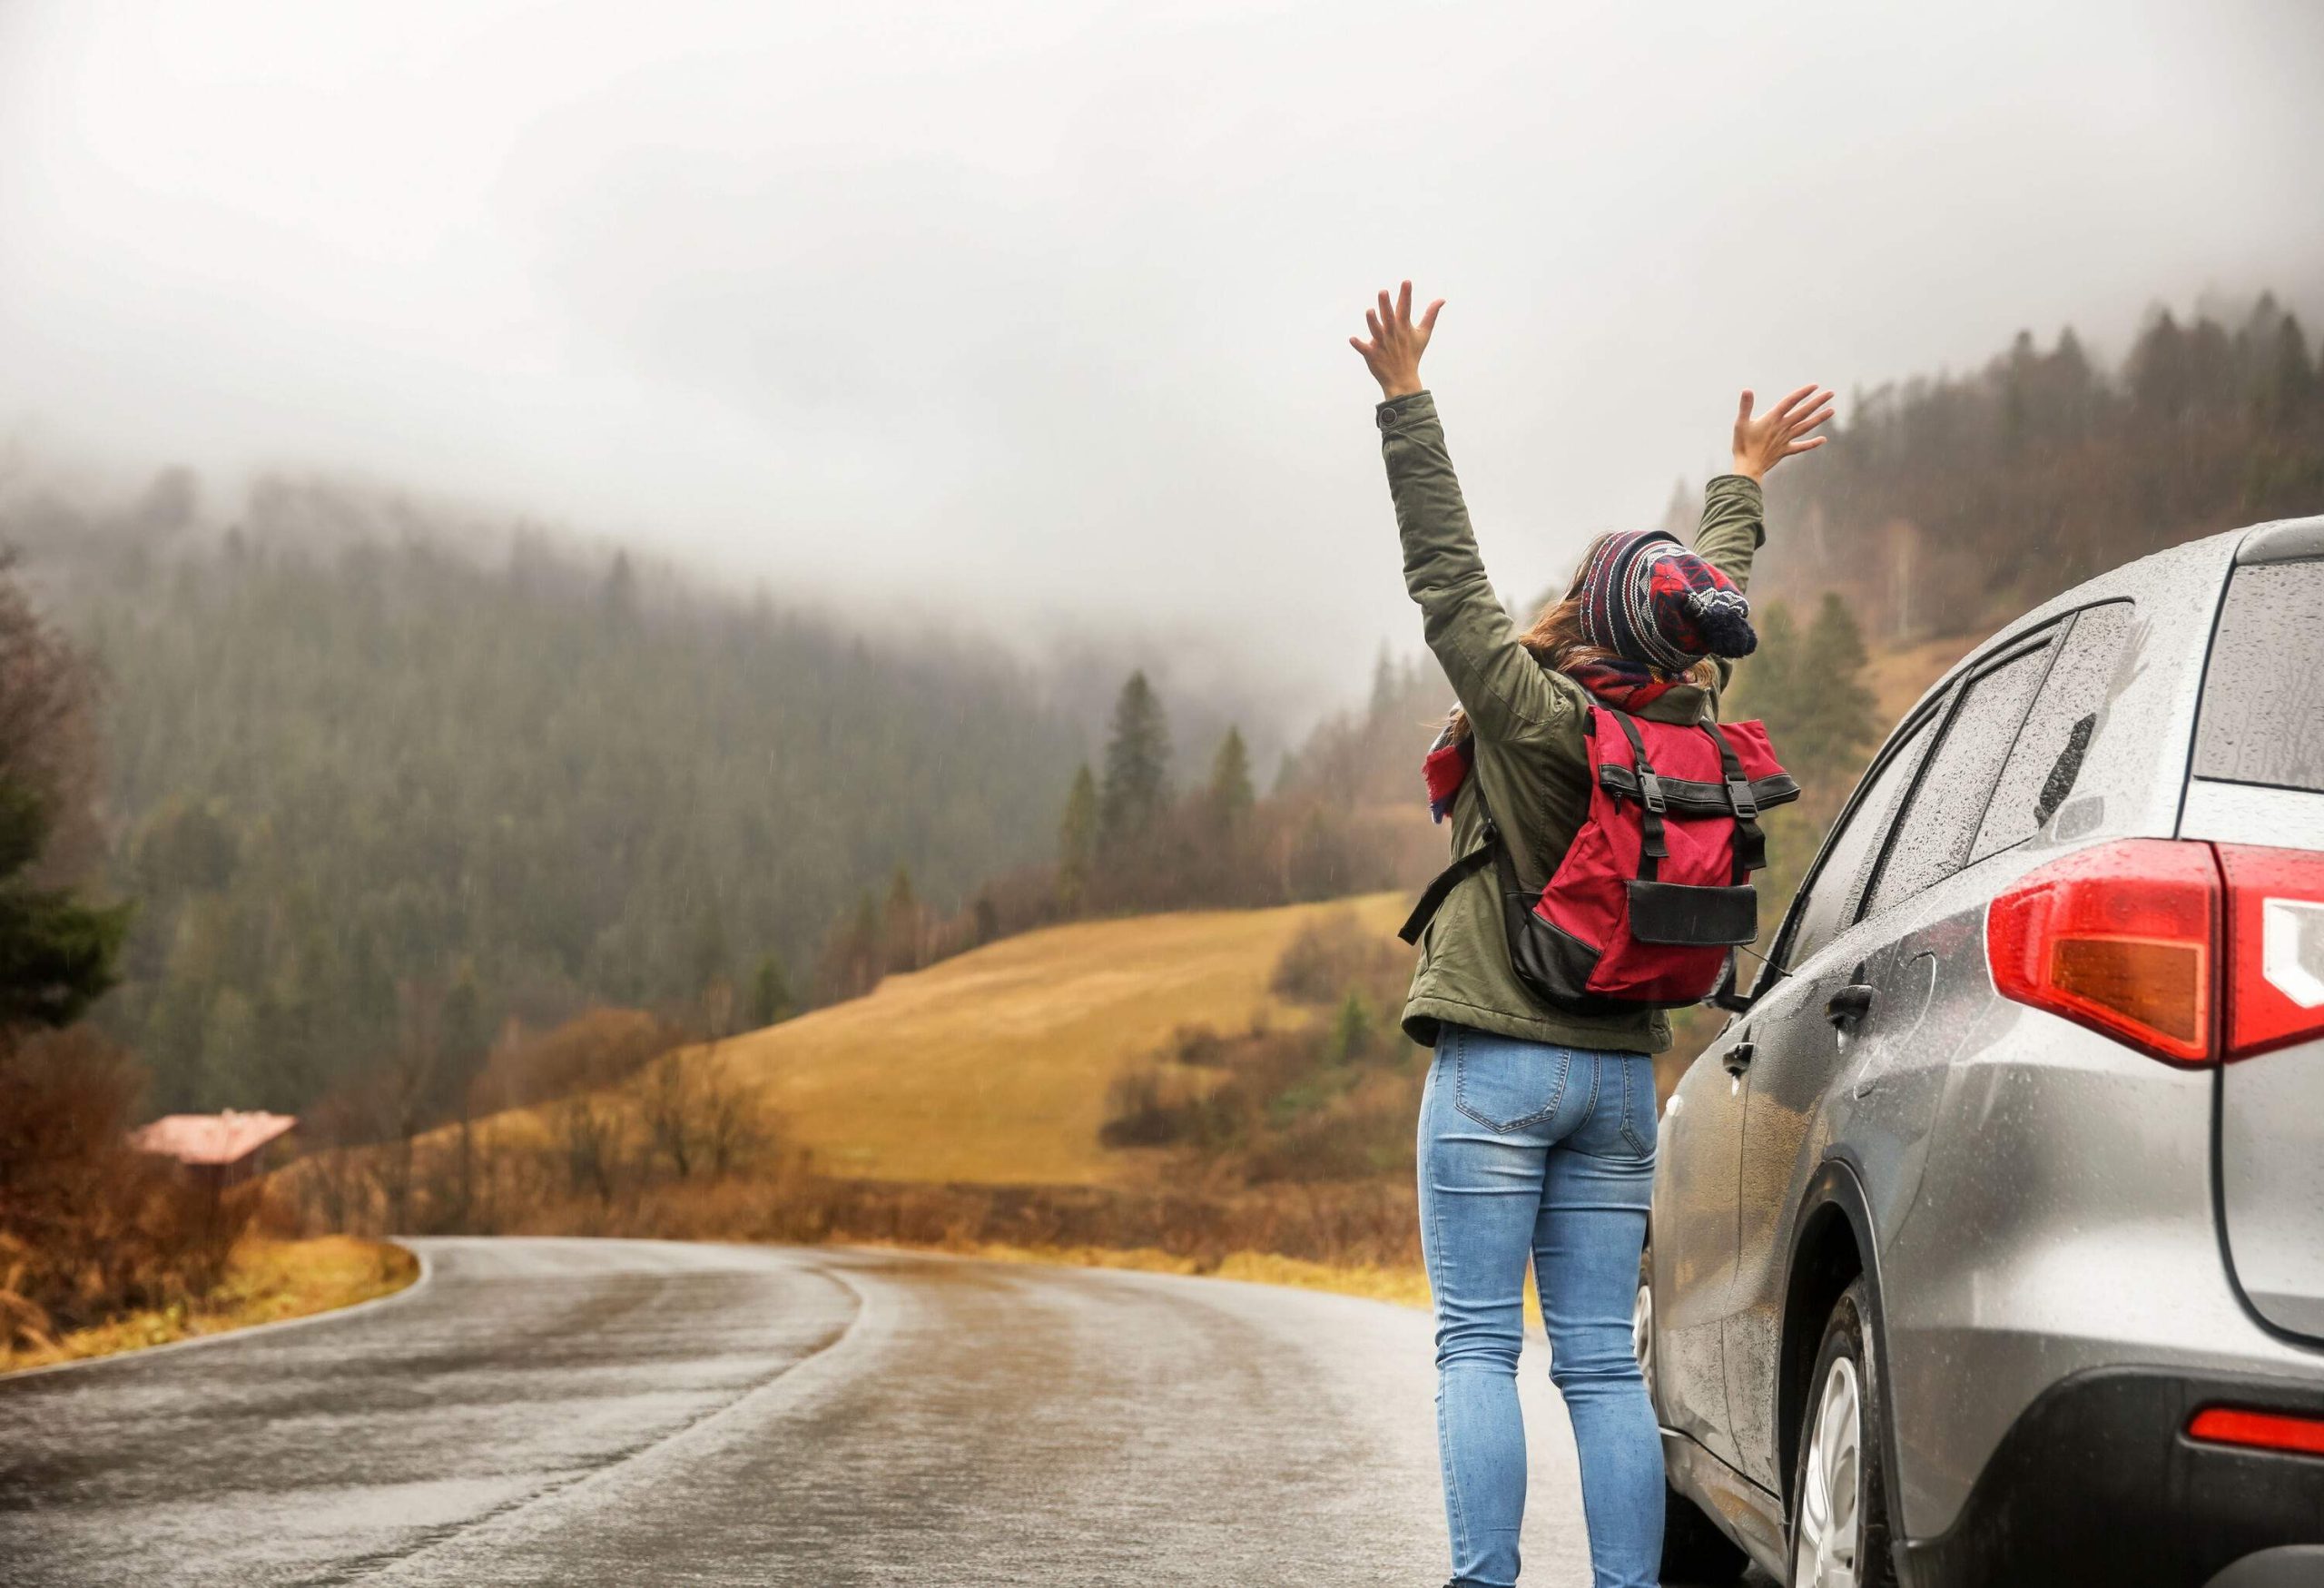 A woman in a casual winter outfit standing on the side of a wet road next to a car, looking up to the grey skies with arms raised.